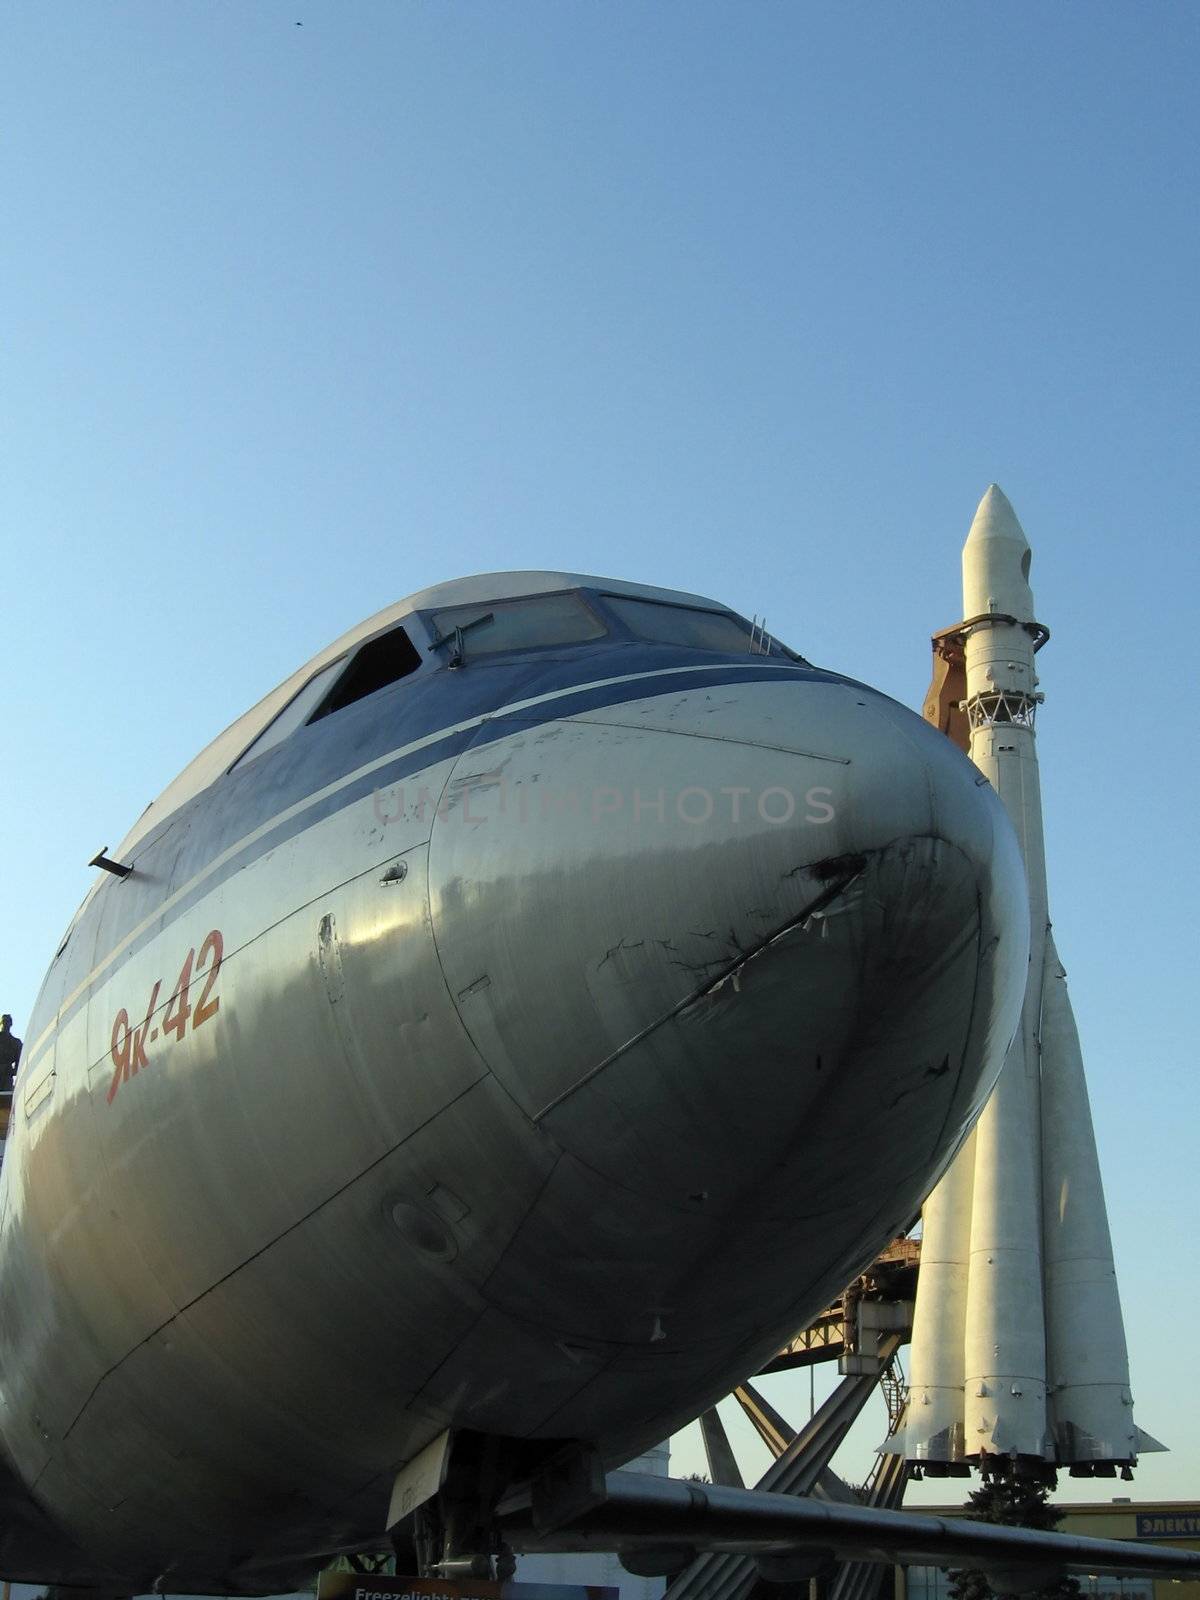 Rocket with the plane in front on a background of blue sky